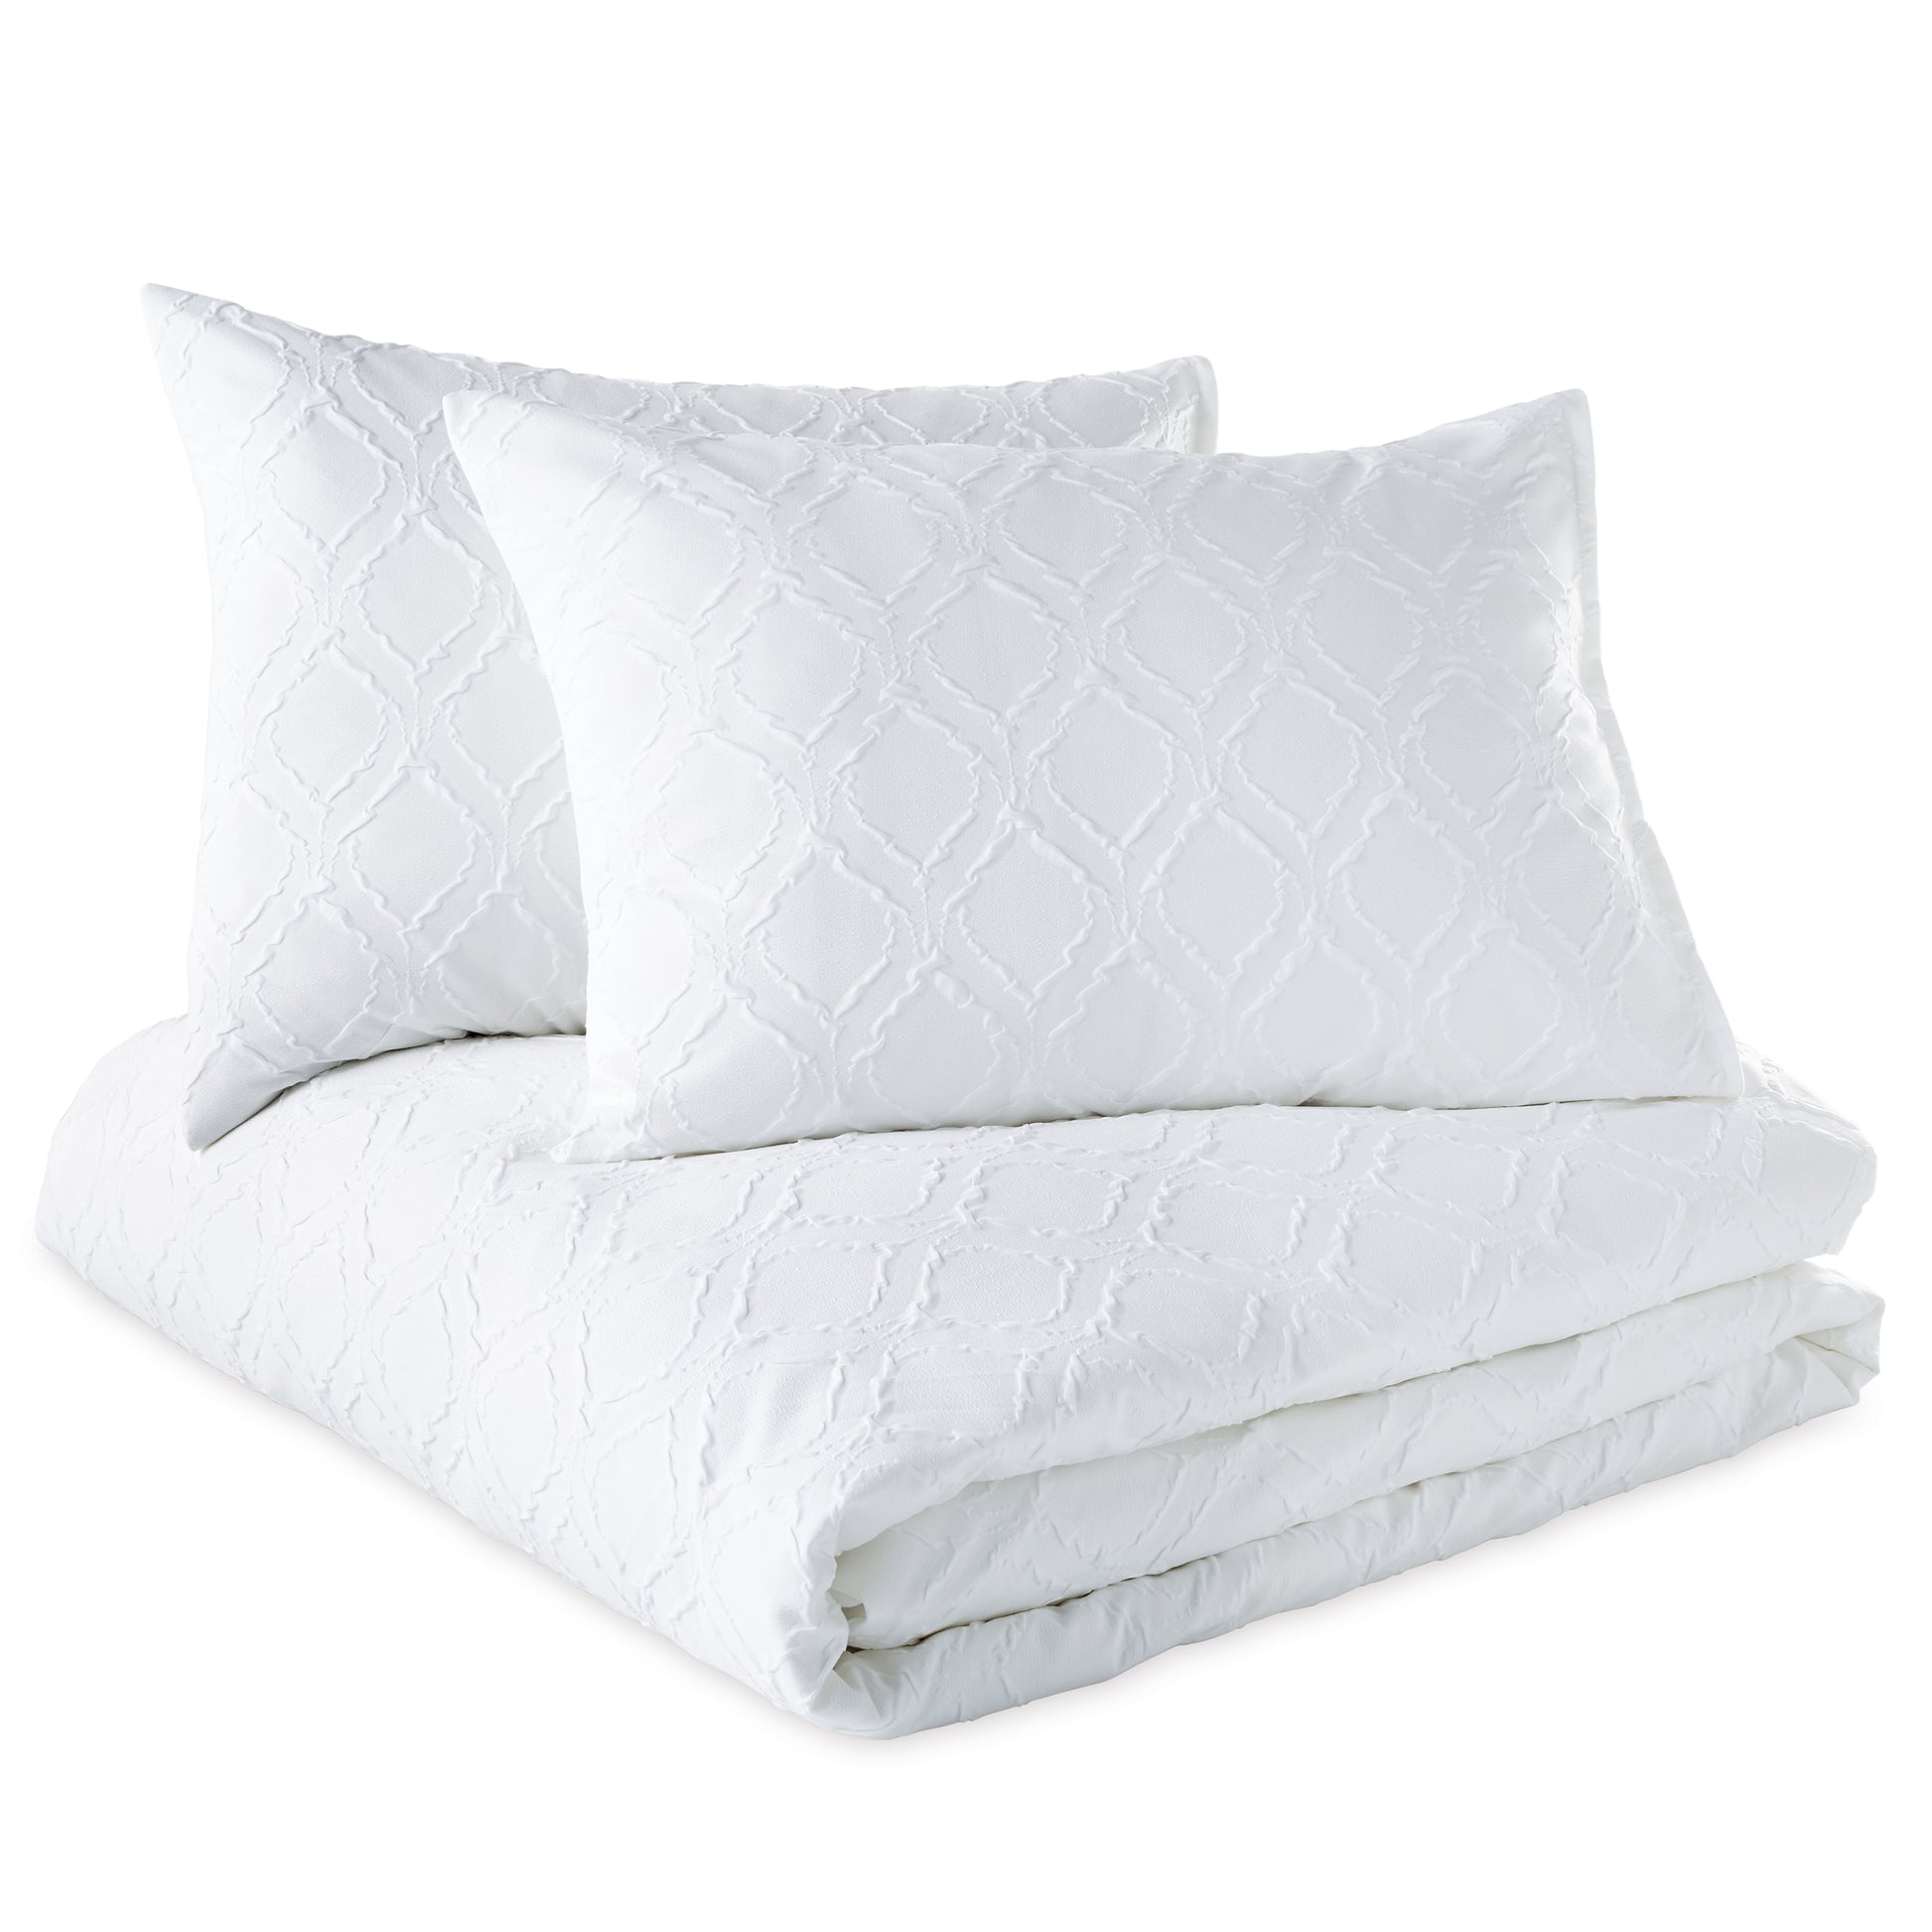 Microsculpt Solid Ogee Comforter Set white